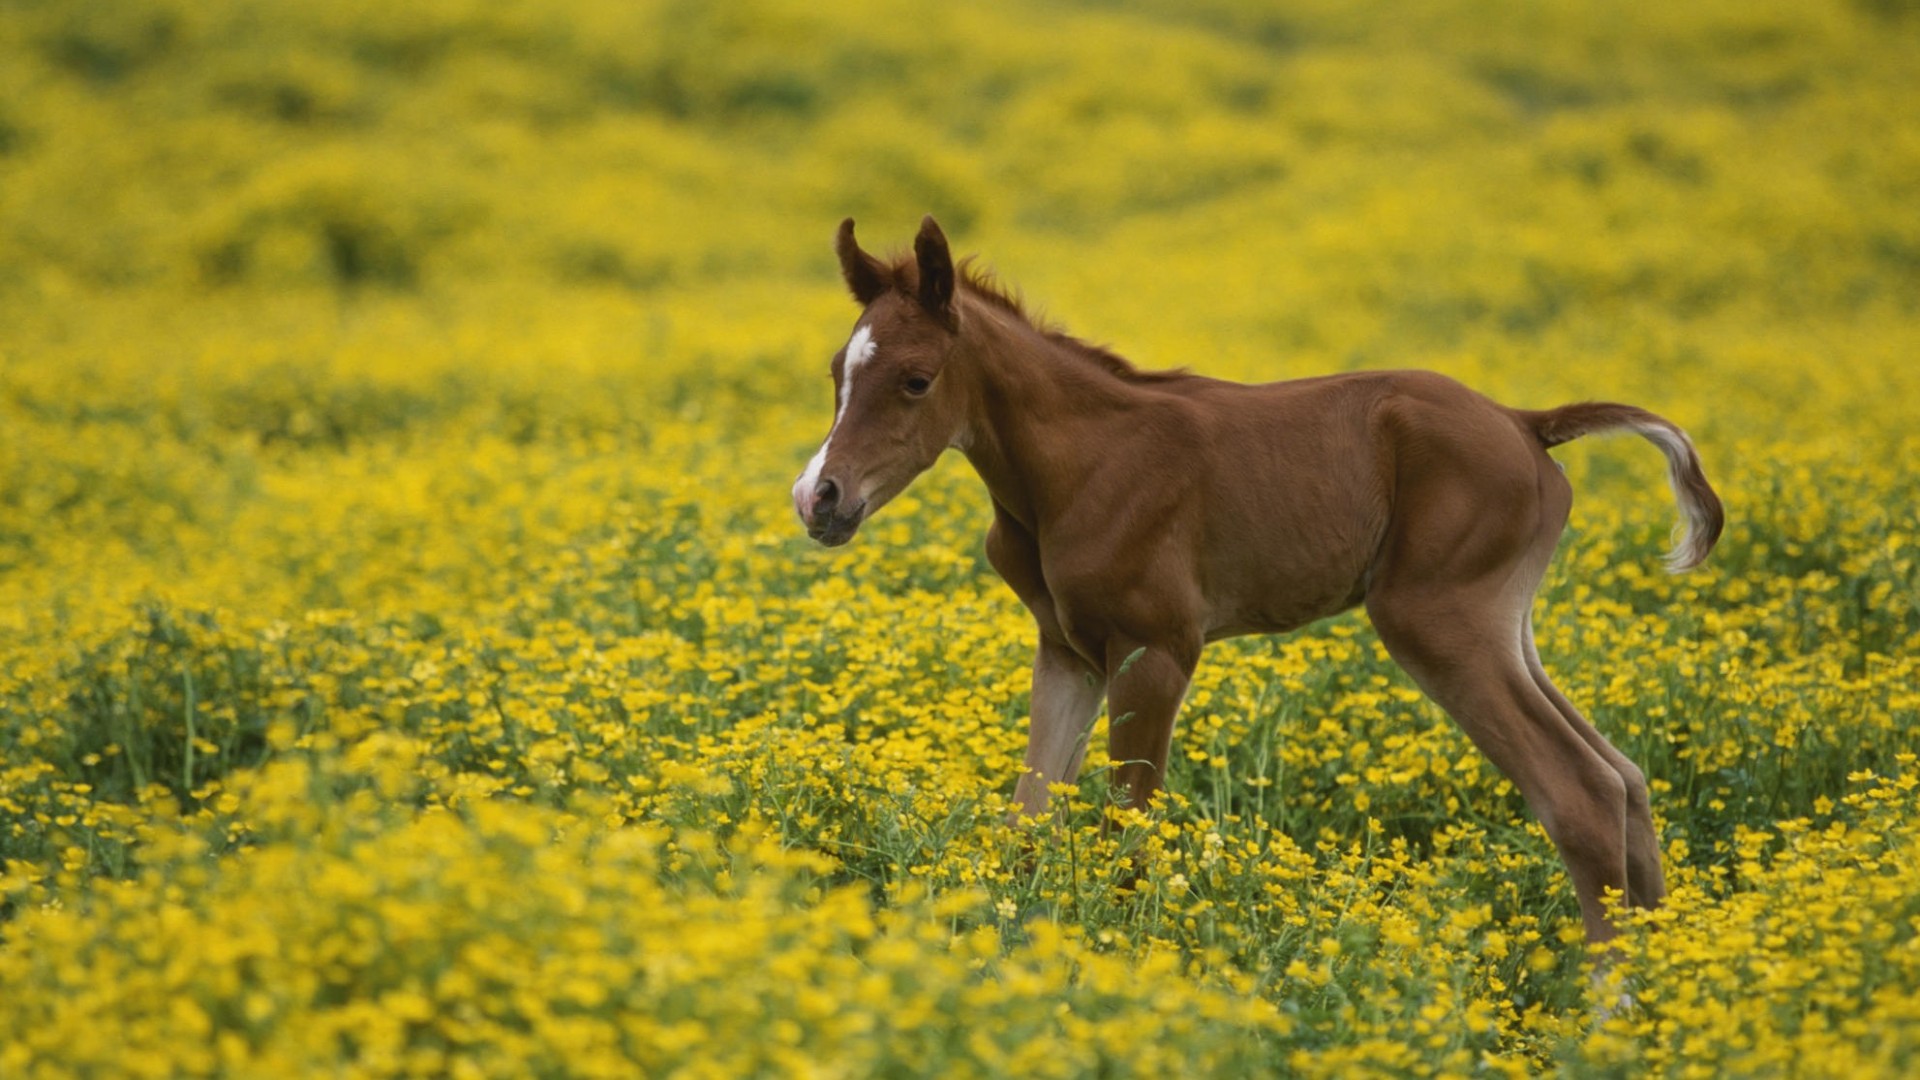 Two Day Old Arabian Colt - Baby Horse , HD Wallpaper & Backgrounds